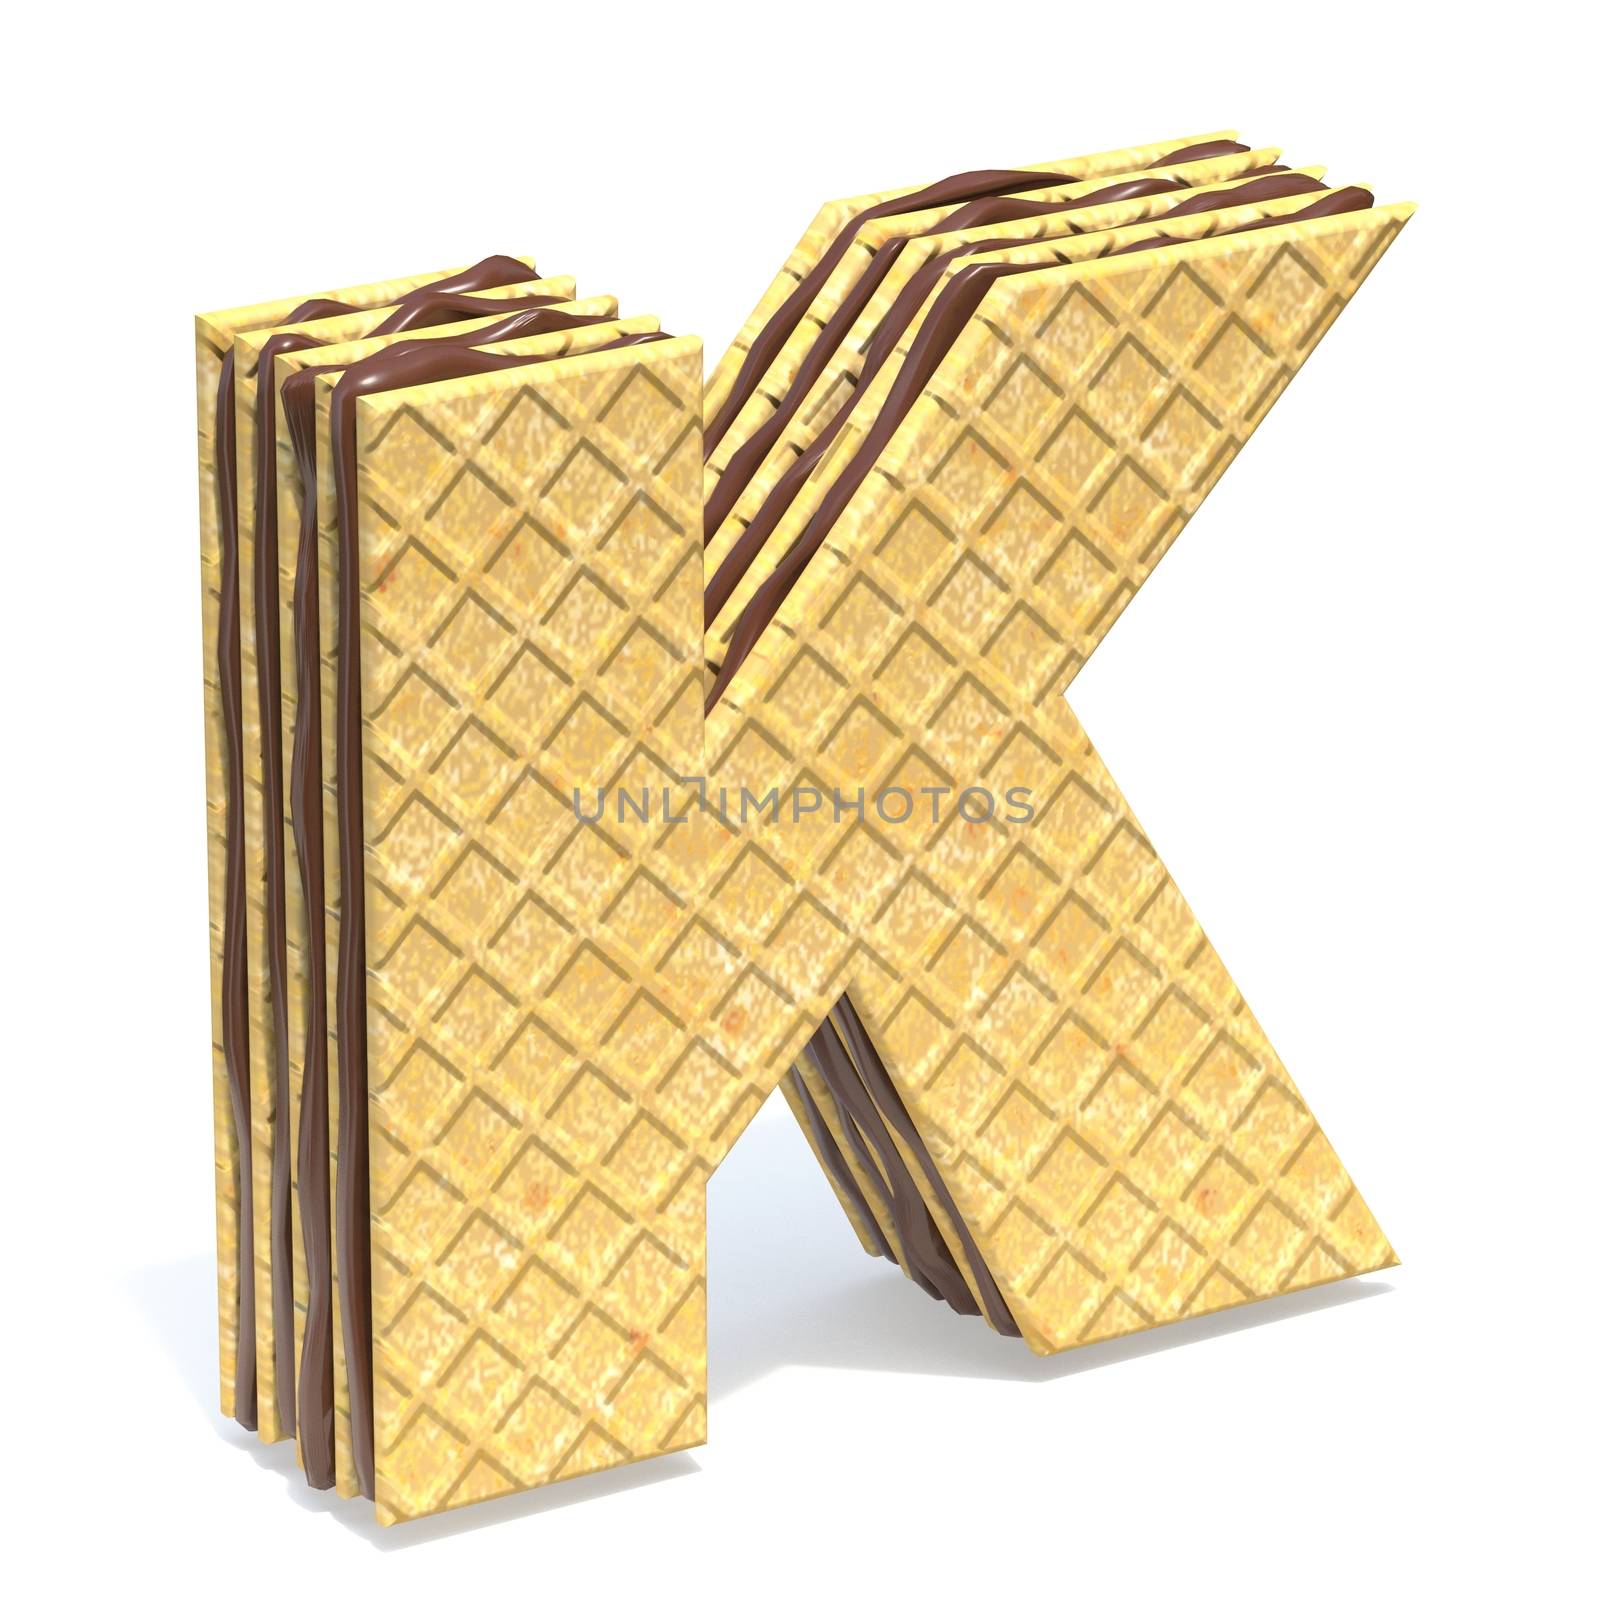 Waffles font with chocolate cream filling Letter K 3D rendering illustration isolated on white background